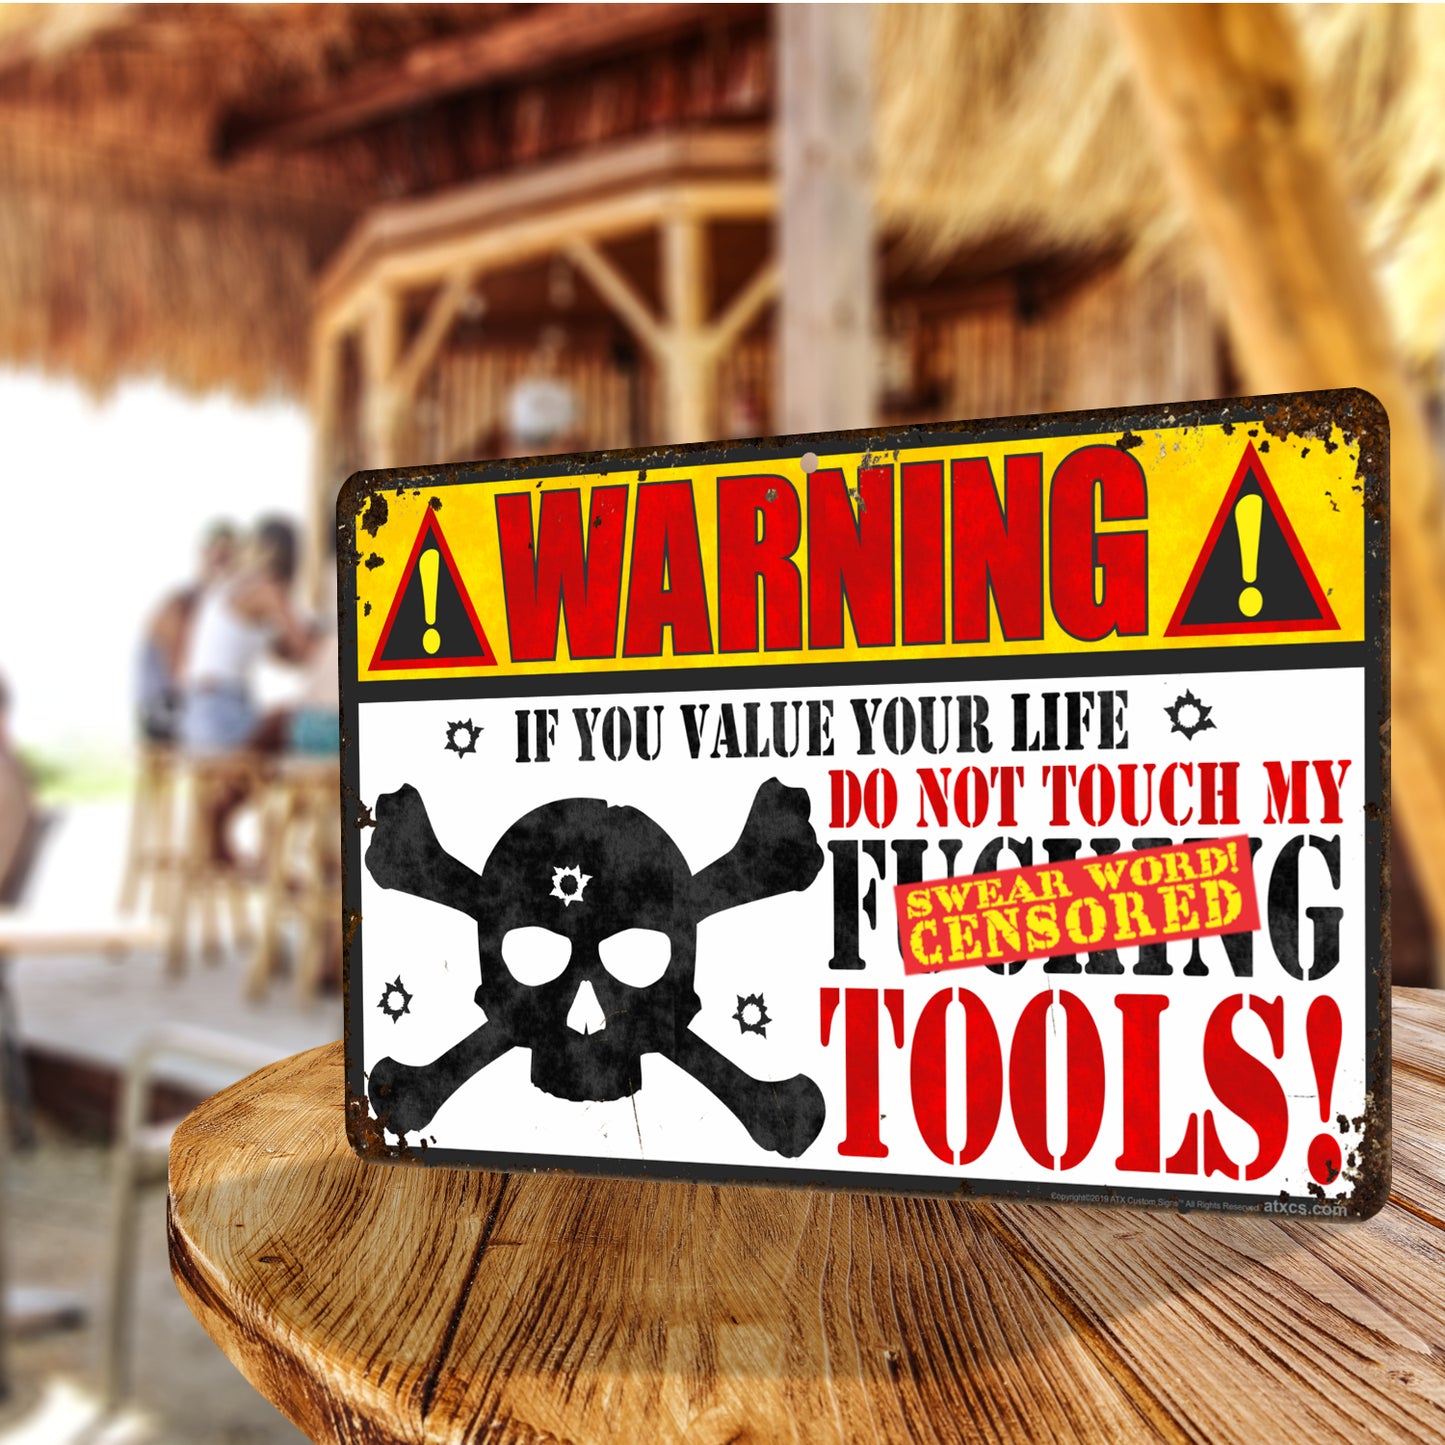 Funny Metal Sign Warning If You Value Your Life, Do Not Touch My F-ing Tools! Rustic Looking Sign - Size 8 x 12